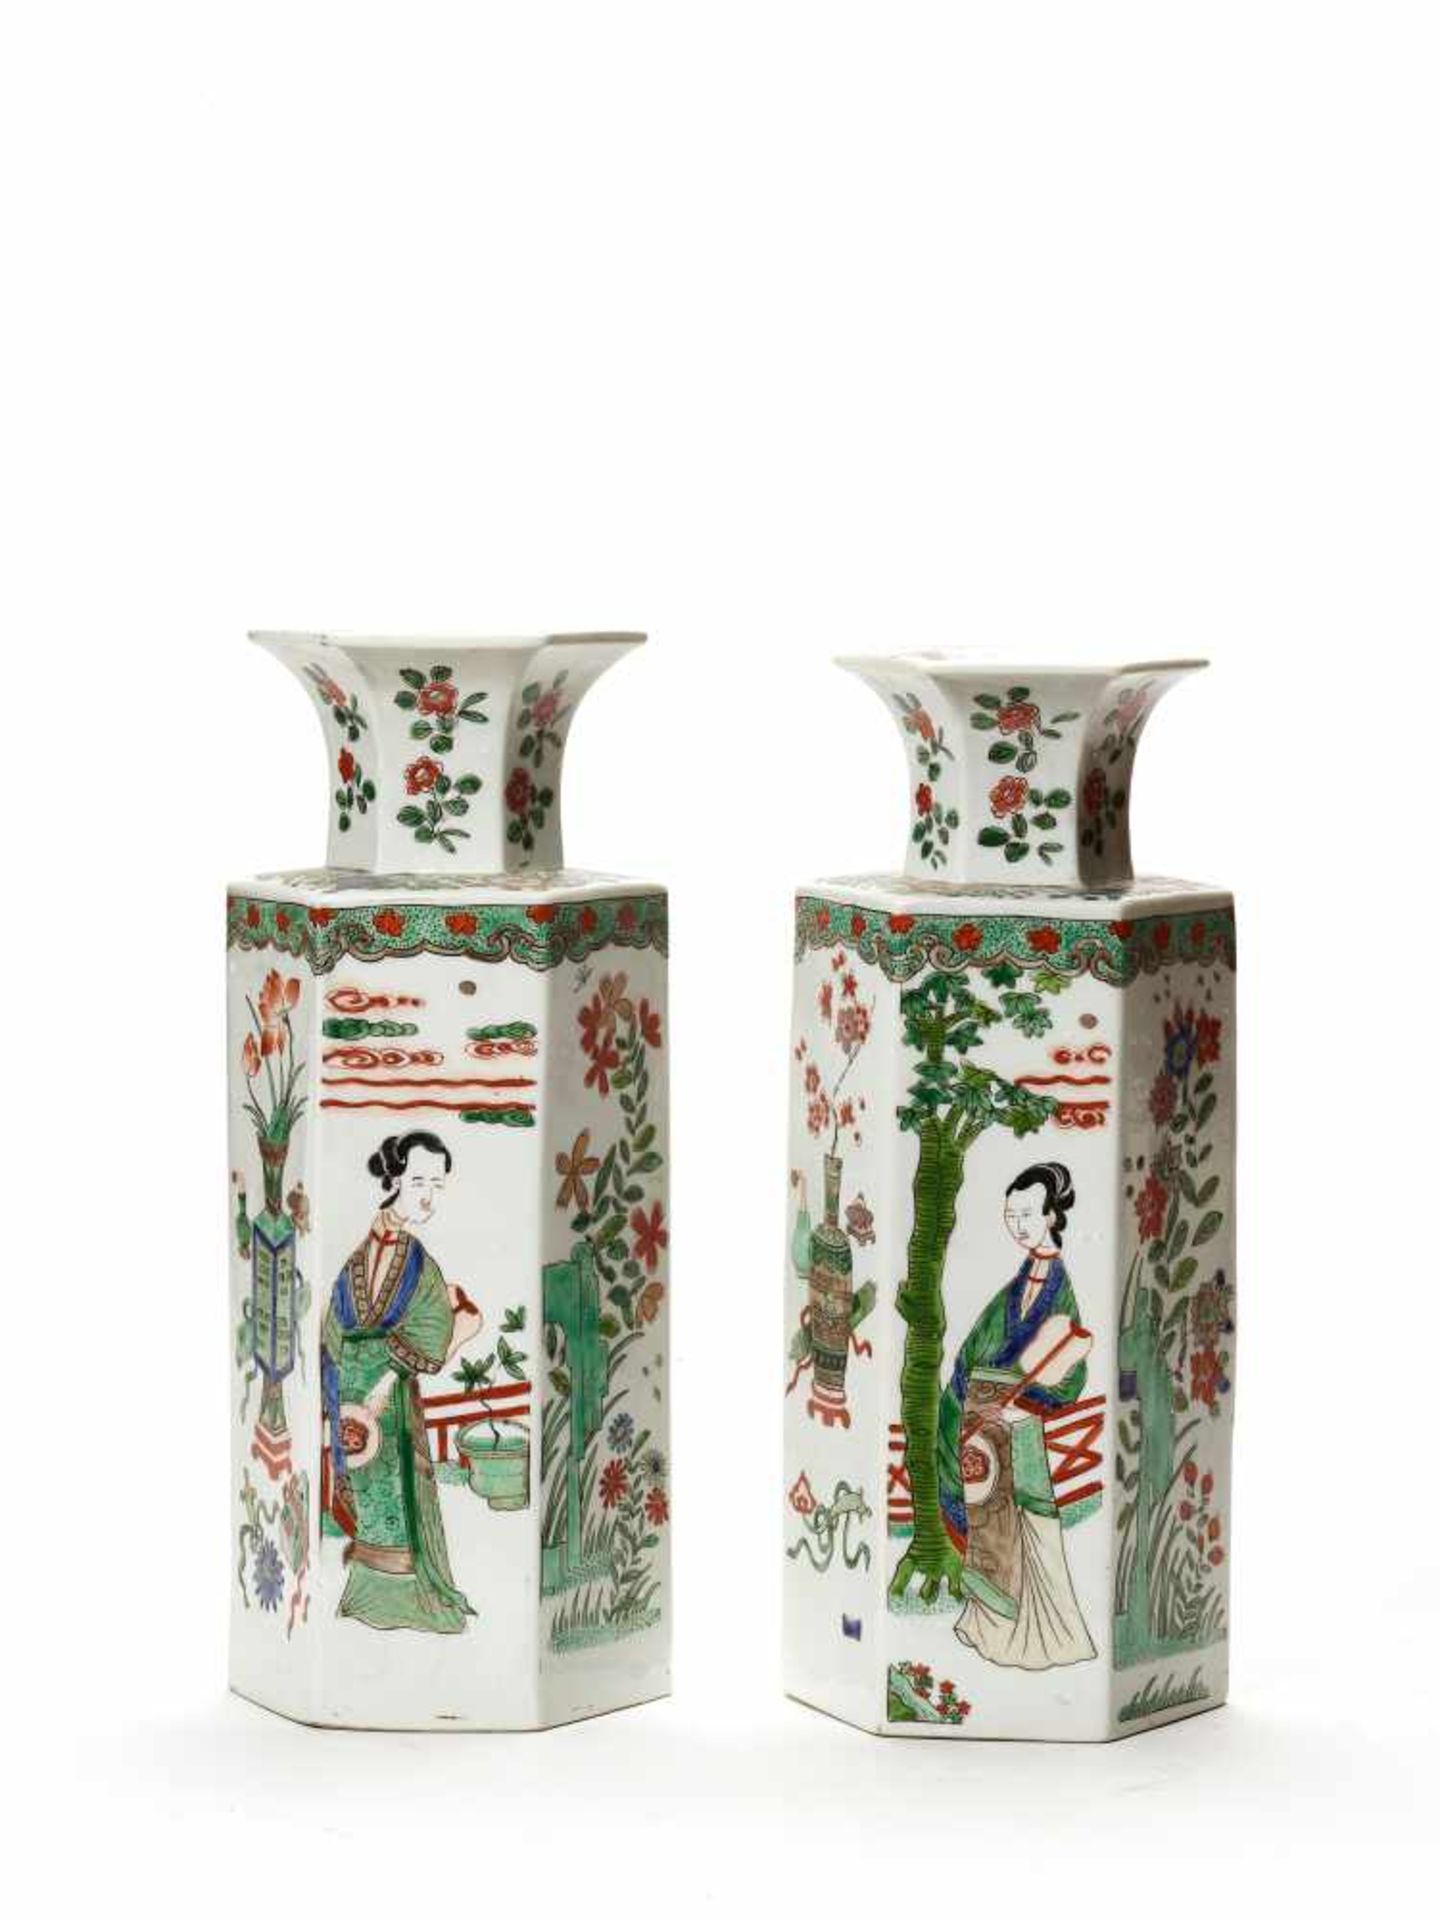 A PAIR OF CHINESE FAMILLE VERTE PORCELAIN VASES, 19TH CENTURYFamille verte porcelainChina, 19th